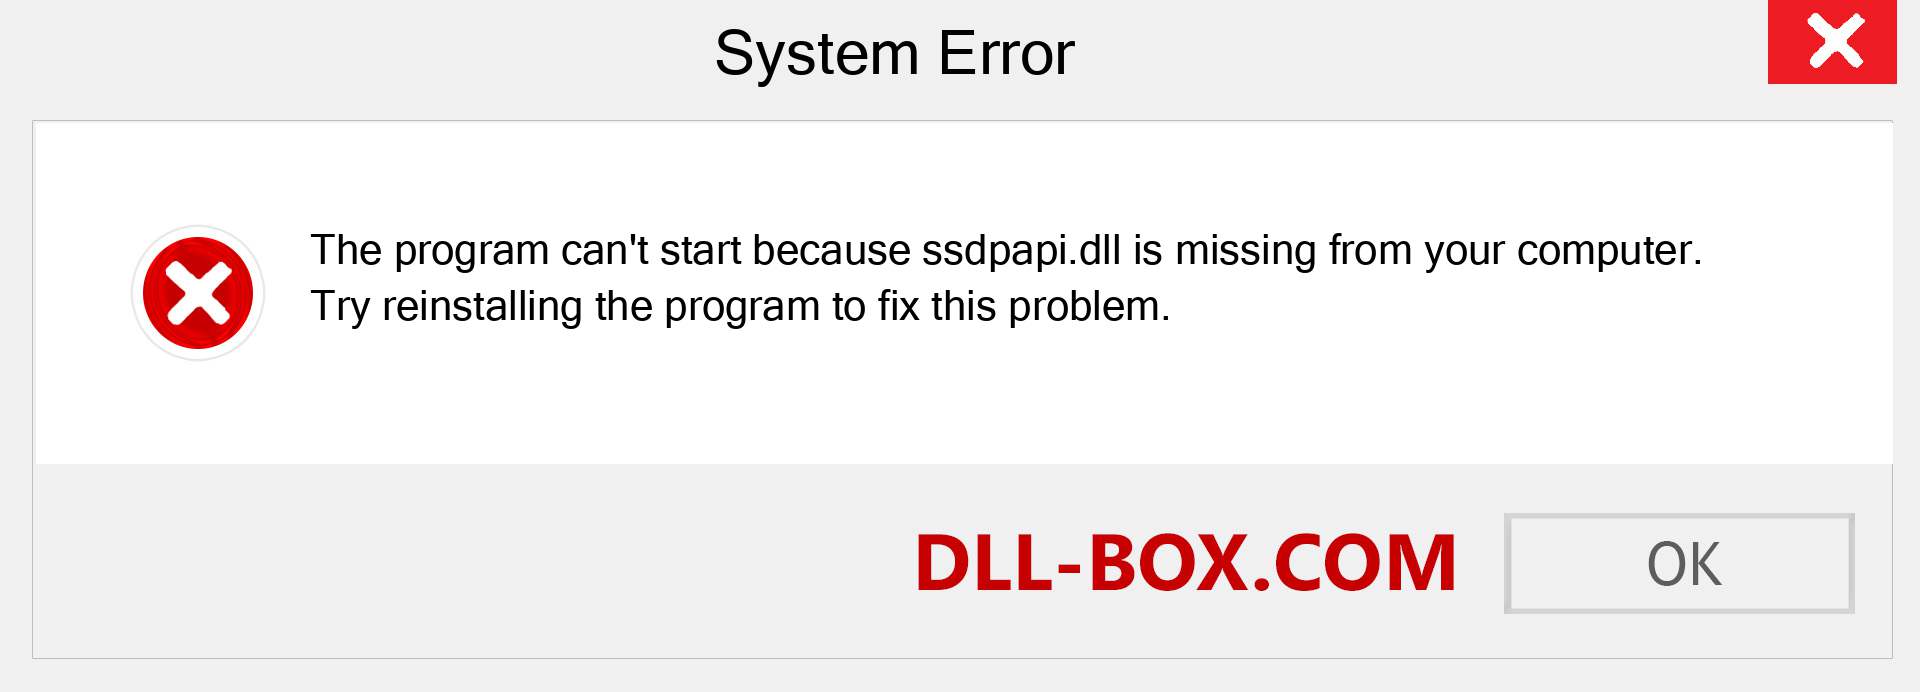  ssdpapi.dll file is missing?. Download for Windows 7, 8, 10 - Fix  ssdpapi dll Missing Error on Windows, photos, images